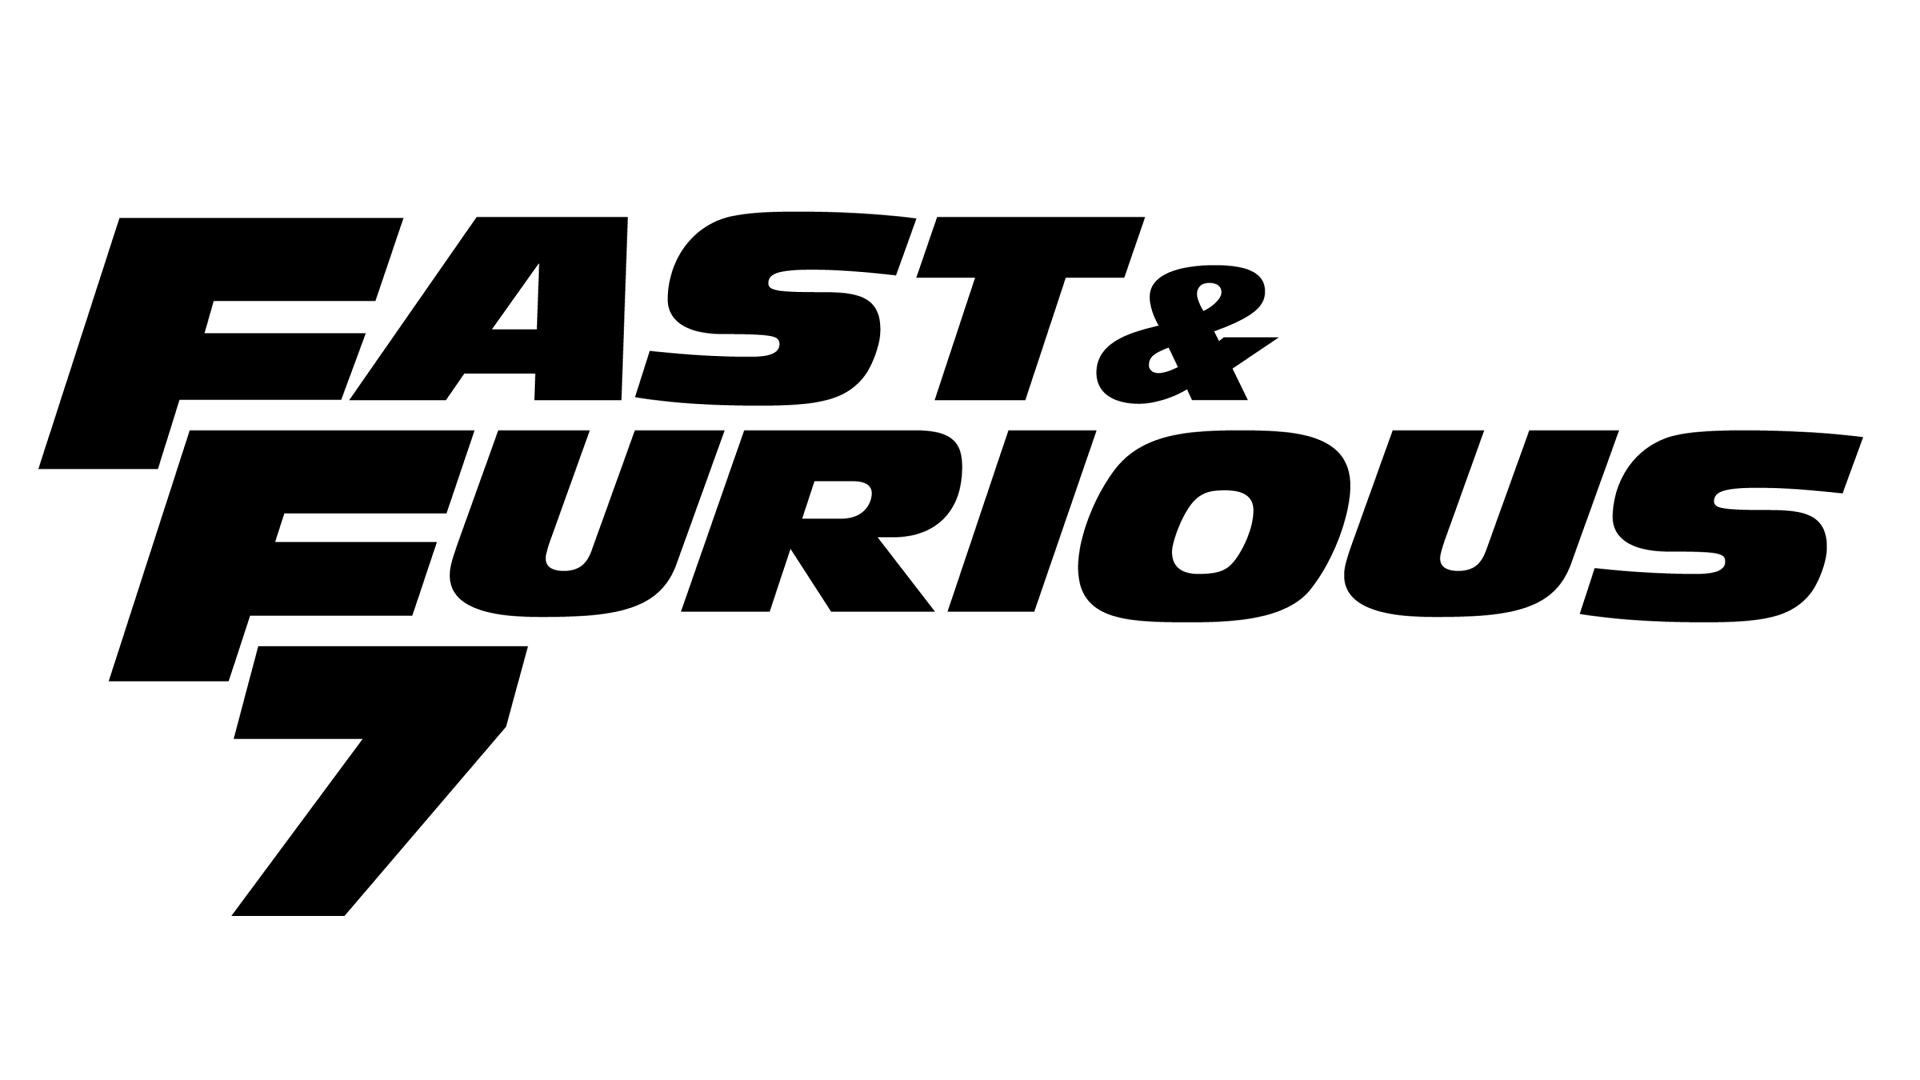 Furious 7 download the last version for ios